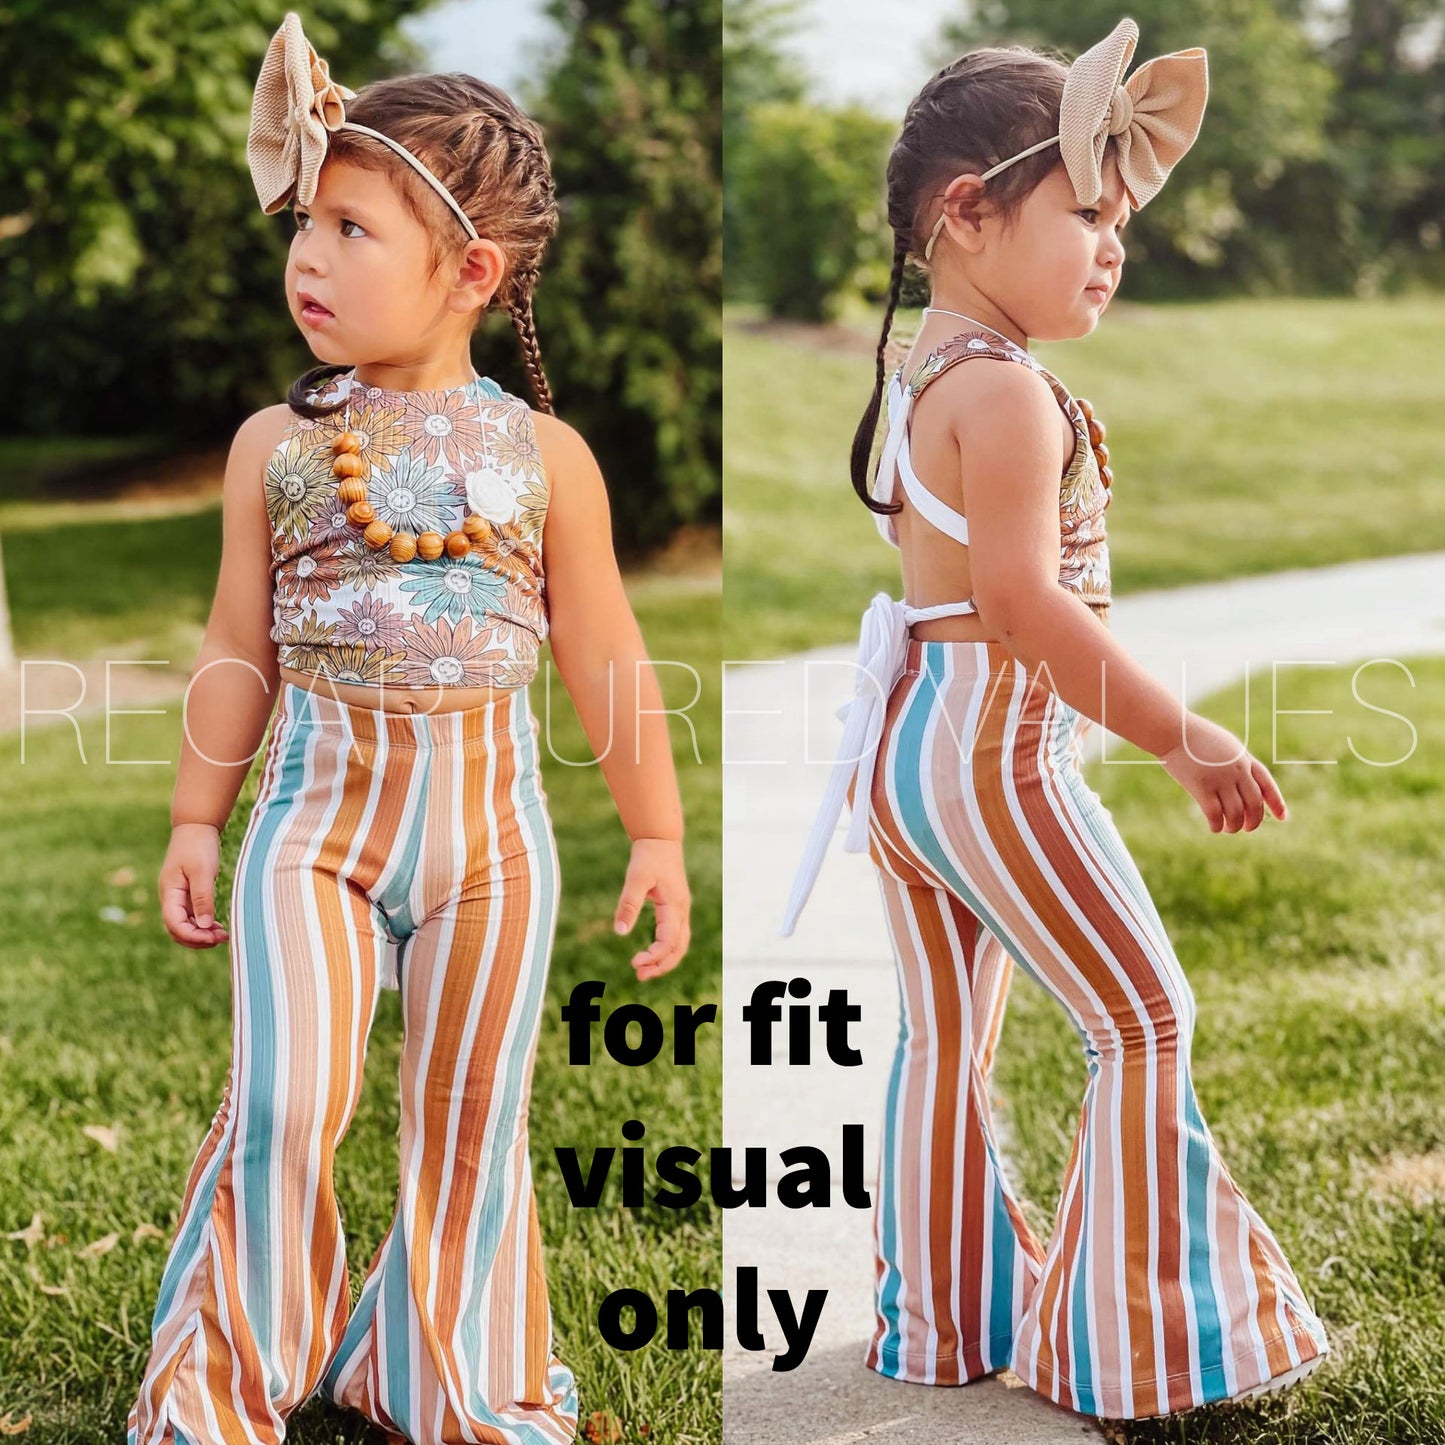 Groovy Retro Hippie Floral Halter Crop Top with Stripe Flared Bell Bottoms for Baby & Toddler Girls, Peach, Sunset, Rust Brown, Butterscotch